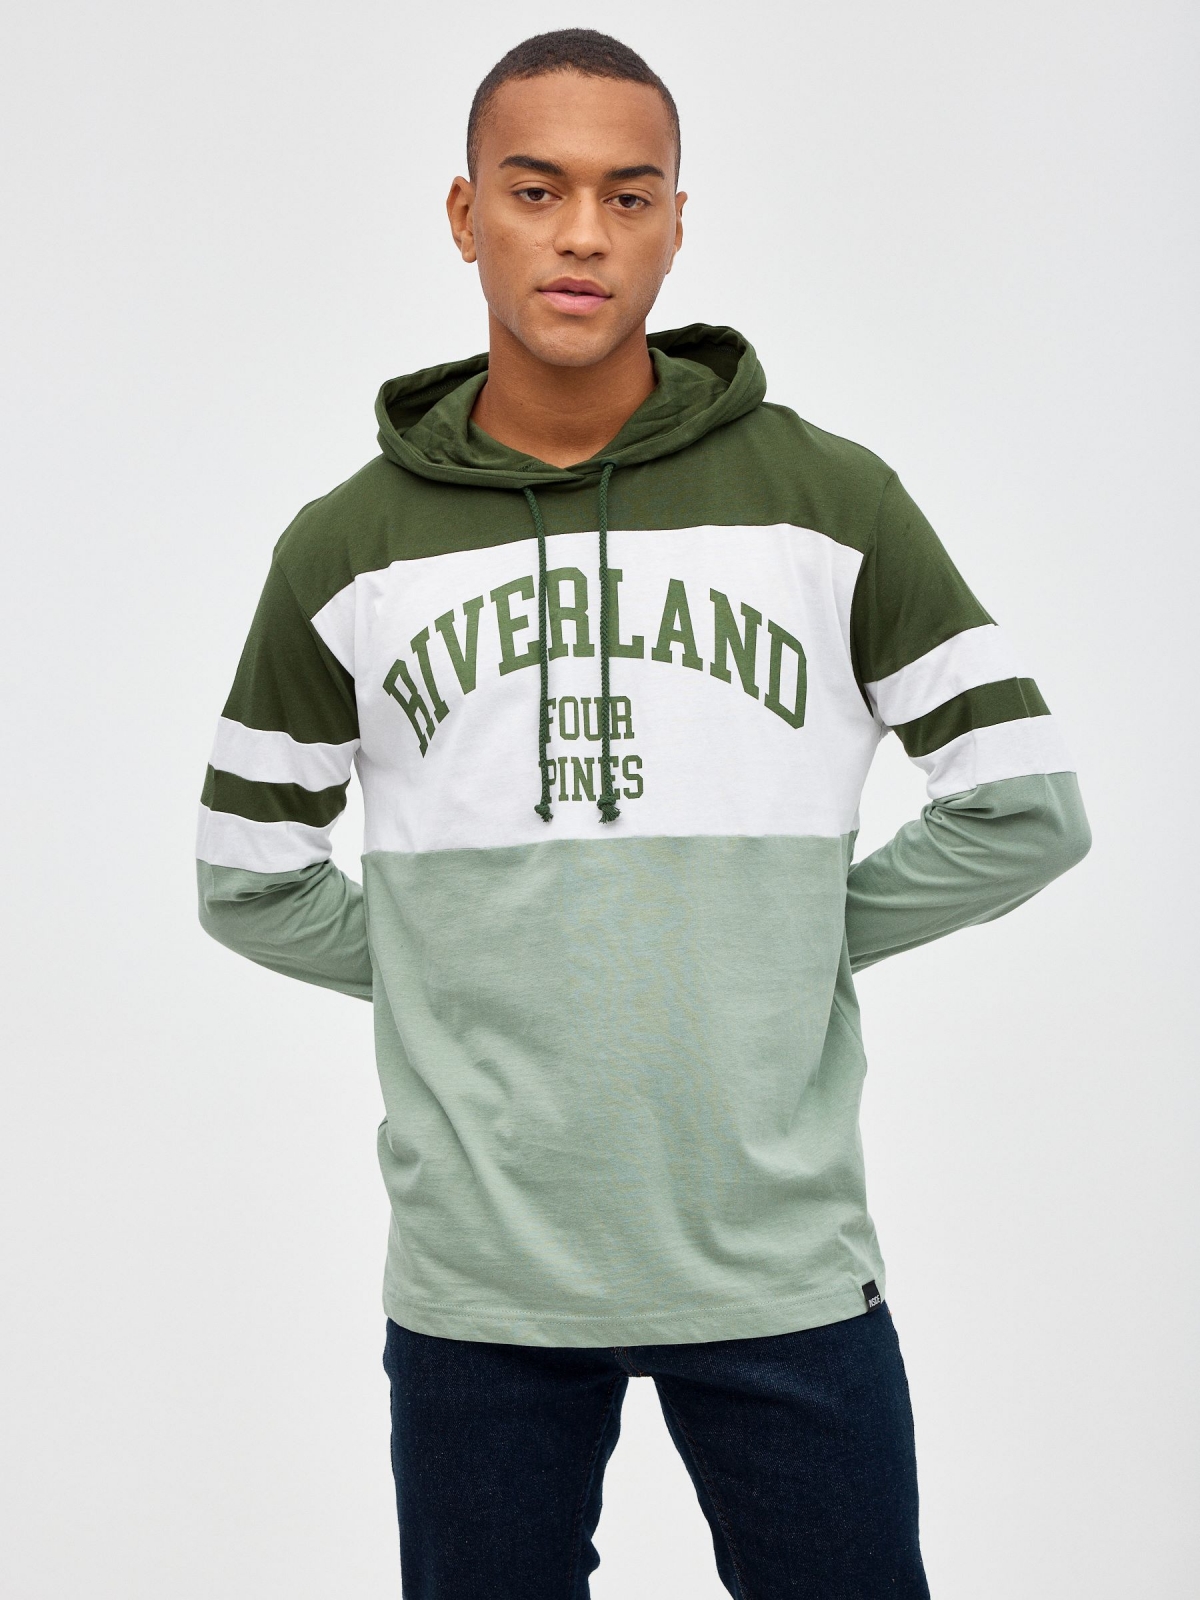 Riverland hooded T-shirt greyish green middle front view